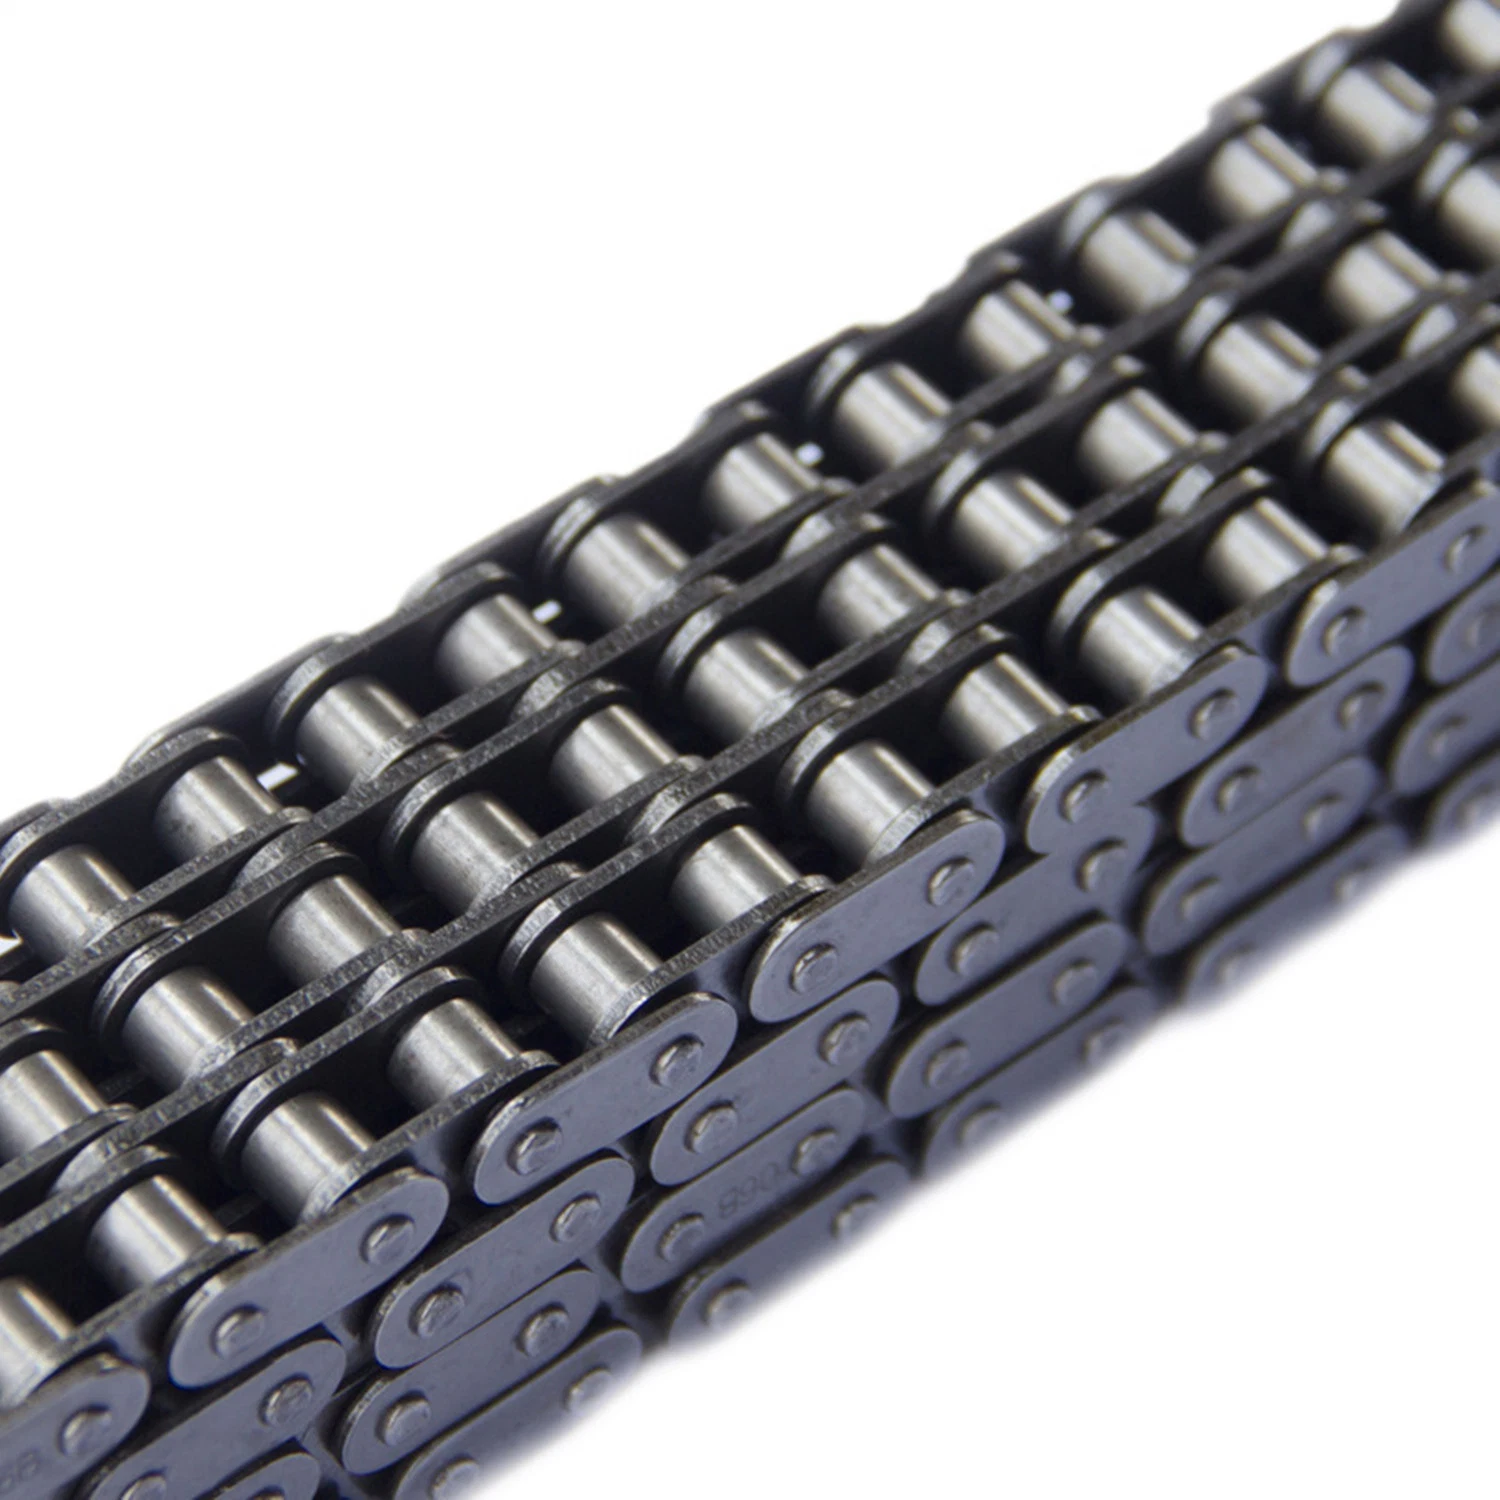 Martin Gearbox 08b High Strength and Wear Resistance Short Pitch Precision Transmission Roller Chains for Industrial and Agricultural